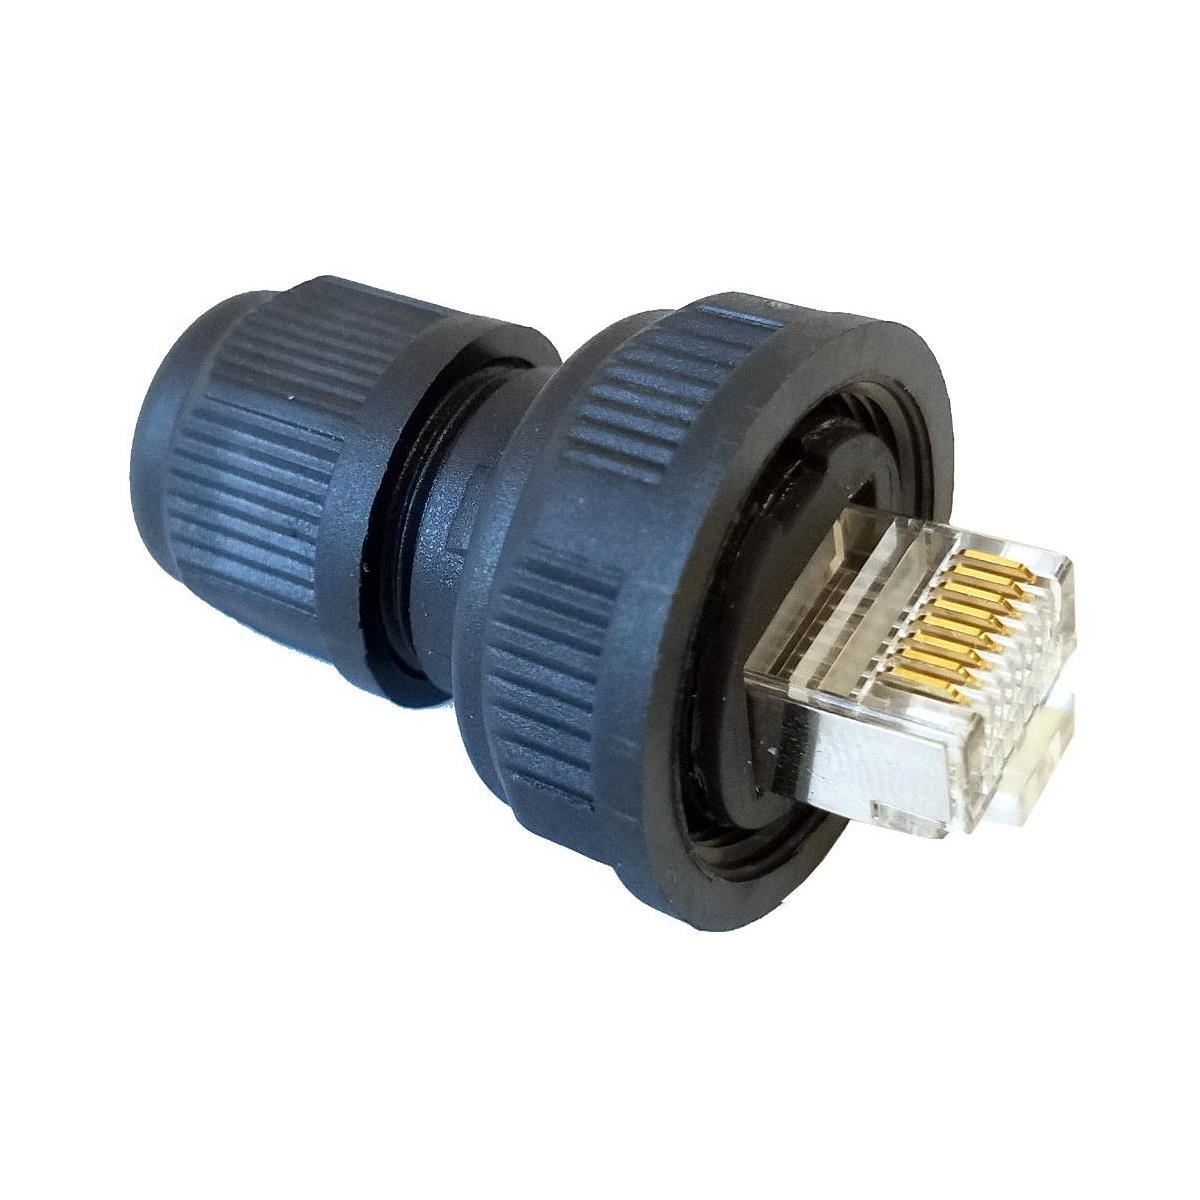 Image of Nila Weatherproof Cat-5 Cable Connector